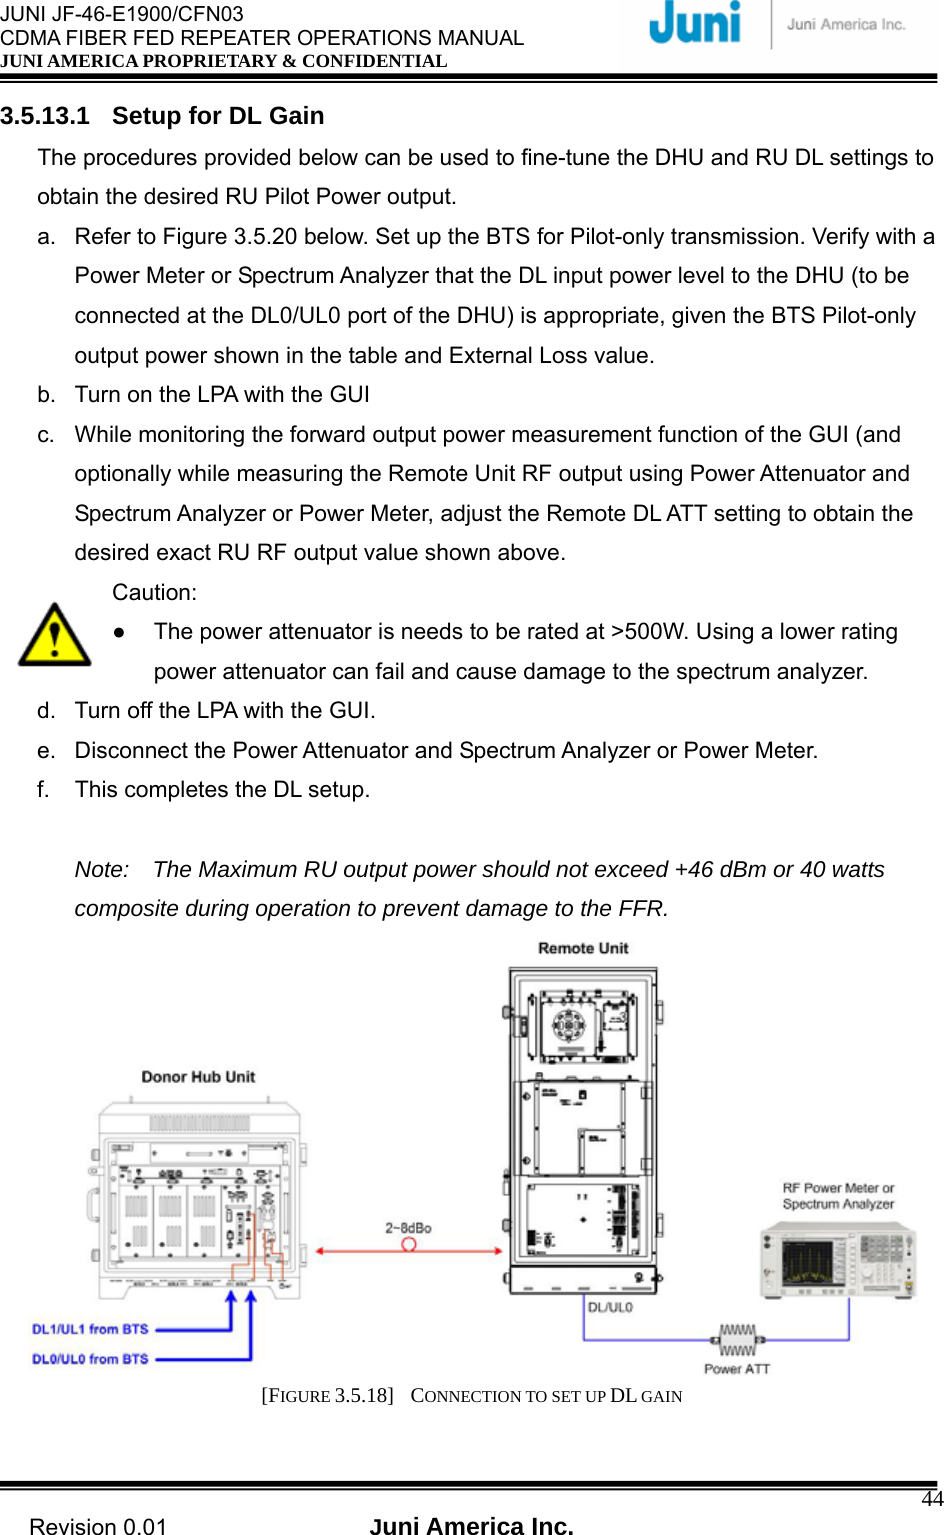  JUNI JF-46-E1900/CFN03 CDMA FIBER FED REPEATER OPERATIONS MANUAL JUNI AMERICA PROPRIETARY &amp; CONFIDENTIAL                                   Revision 0.01  Juni America Inc.  443.5.13.1  Setup for DL Gain The procedures provided below can be used to fine-tune the DHU and RU DL settings to obtain the desired RU Pilot Power output. a.  Refer to Figure 3.5.20 below. Set up the BTS for Pilot-only transmission. Verify with a Power Meter or Spectrum Analyzer that the DL input power level to the DHU (to be connected at the DL0/UL0 port of the DHU) is appropriate, given the BTS Pilot-only output power shown in the table and External Loss value. b.  Turn on the LPA with the GUI c.  While monitoring the forward output power measurement function of the GUI (and optionally while measuring the Remote Unit RF output using Power Attenuator and Spectrum Analyzer or Power Meter, adjust the Remote DL ATT setting to obtain the desired exact RU RF output value shown above. Caution: ●  The power attenuator is needs to be rated at &gt;500W. Using a lower rating power attenuator can fail and cause damage to the spectrum analyzer. d.  Turn off the LPA with the GUI. e.  Disconnect the Power Attenuator and Spectrum Analyzer or Power Meter. f.  This completes the DL setup.  Note:    The Maximum RU output power should not exceed +46 dBm or 40 watts composite during operation to prevent damage to the FFR.  [FIGURE 3.5.18]  CONNECTION TO SET UP DL GAIN  